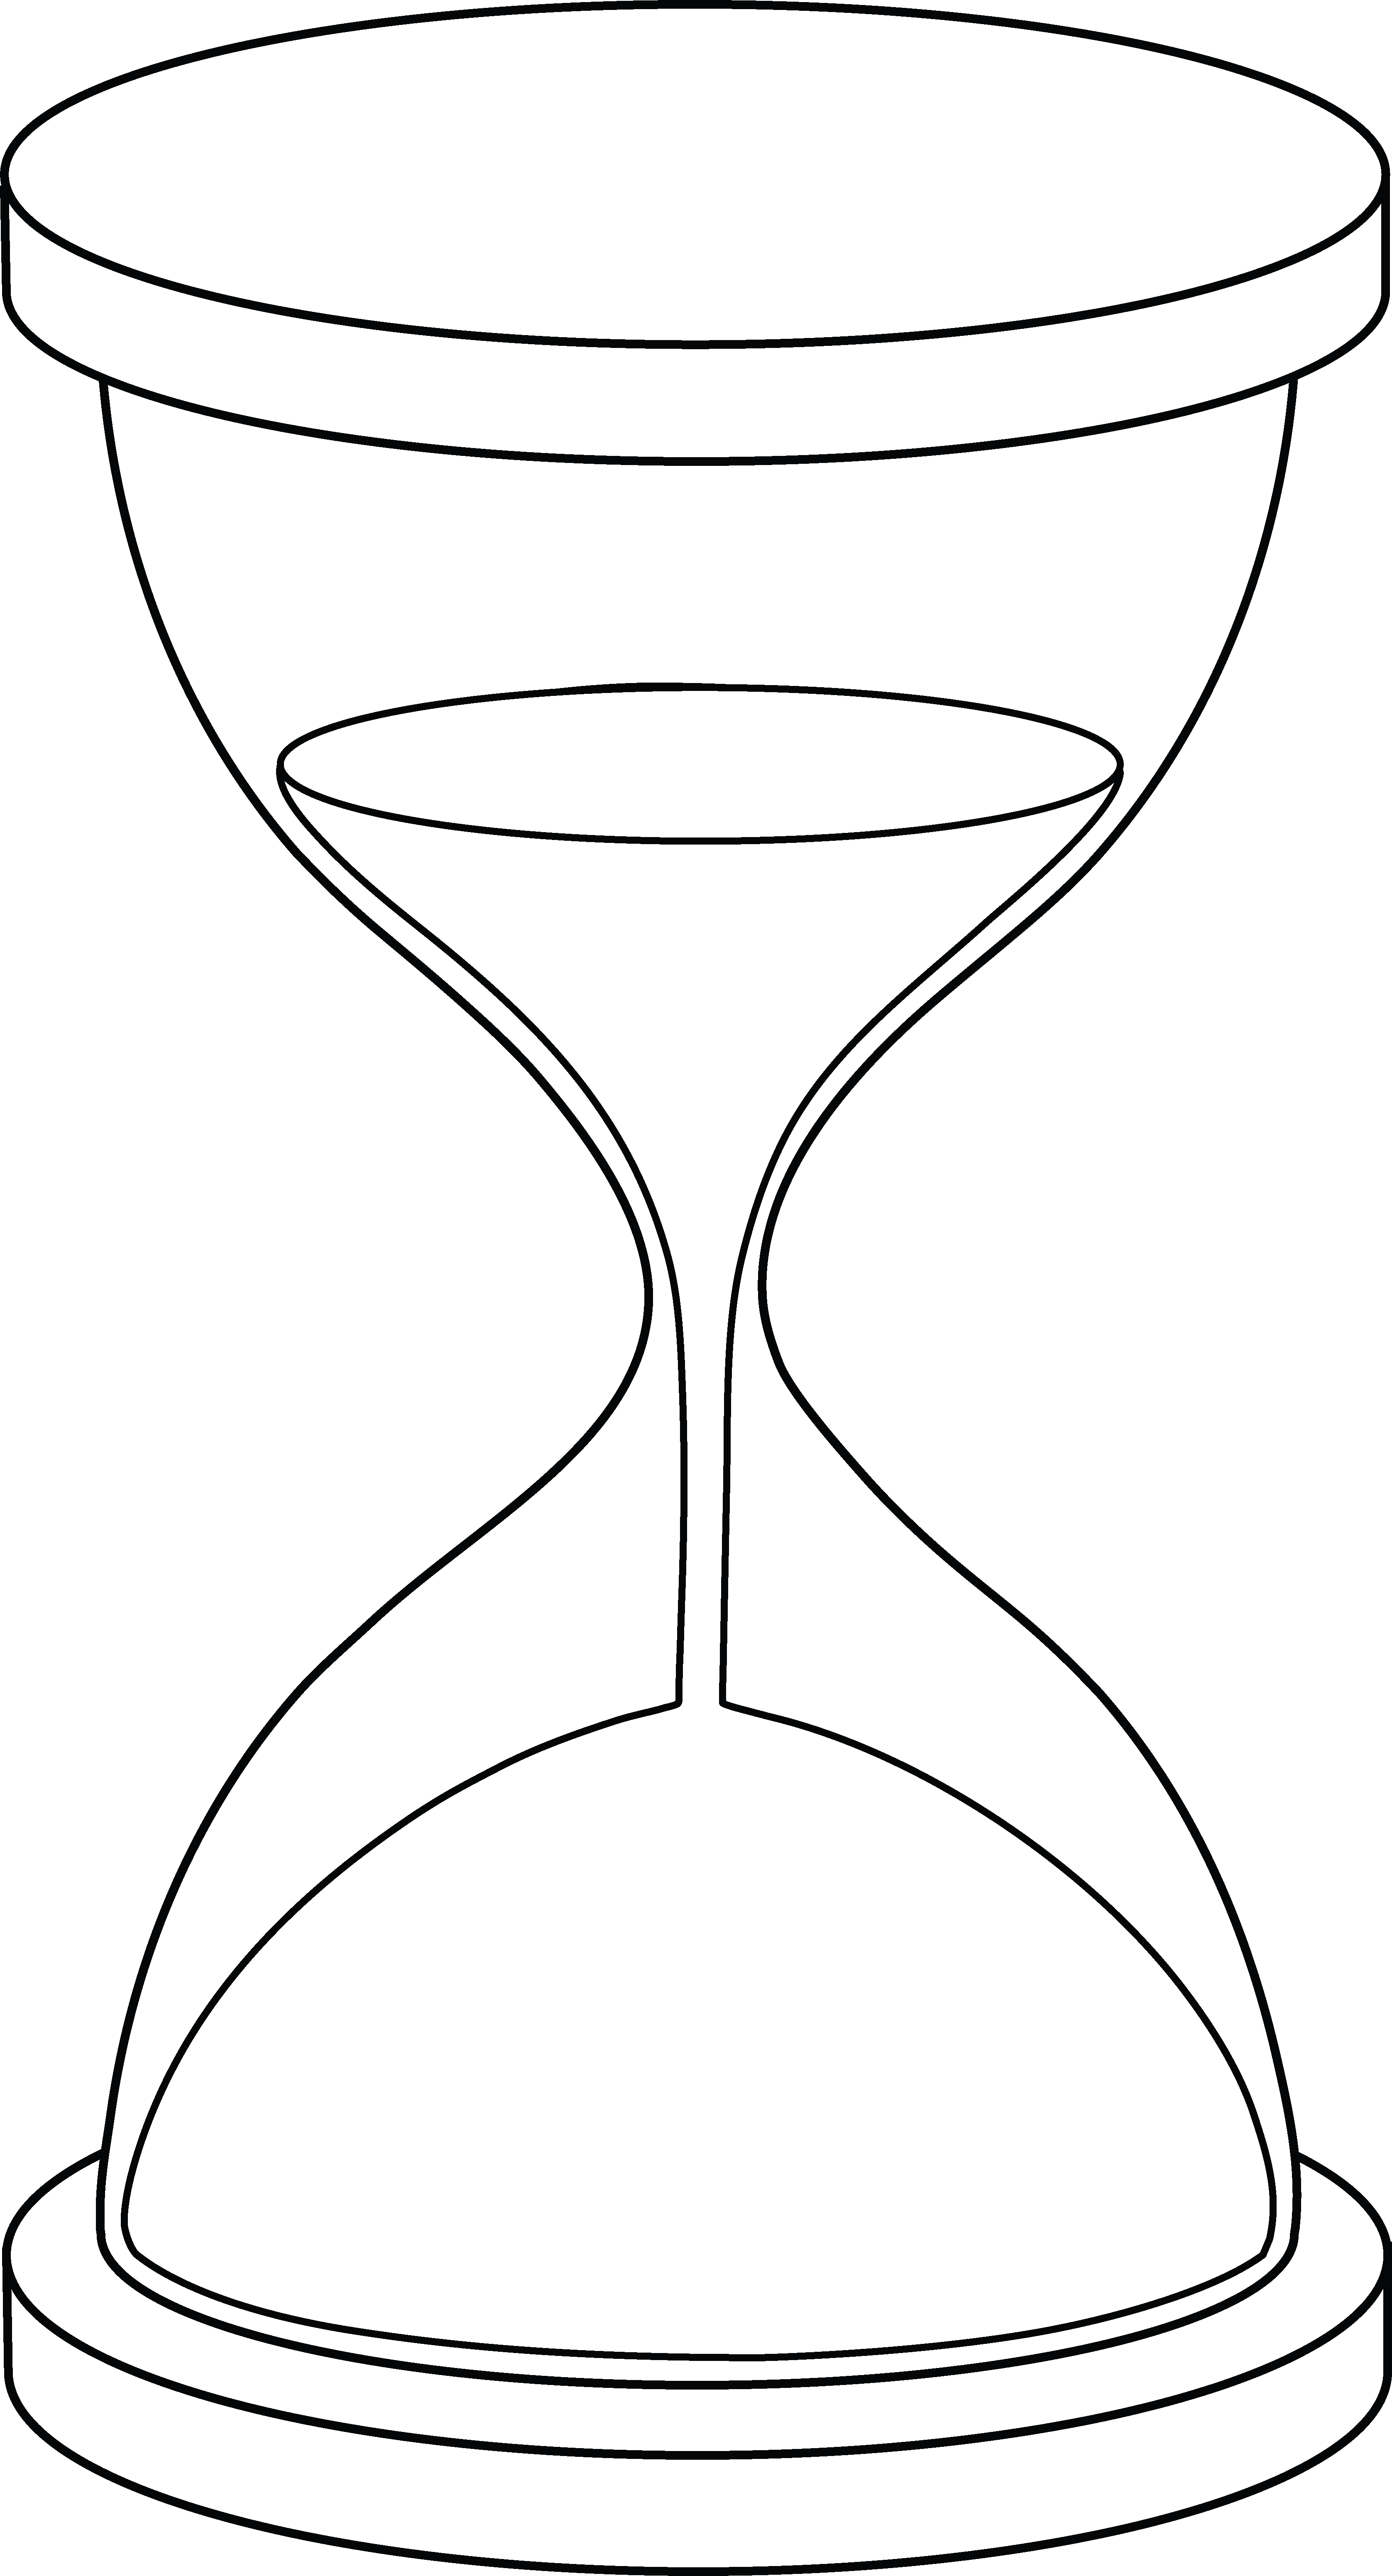 Hourglass Clipart Sand Timer